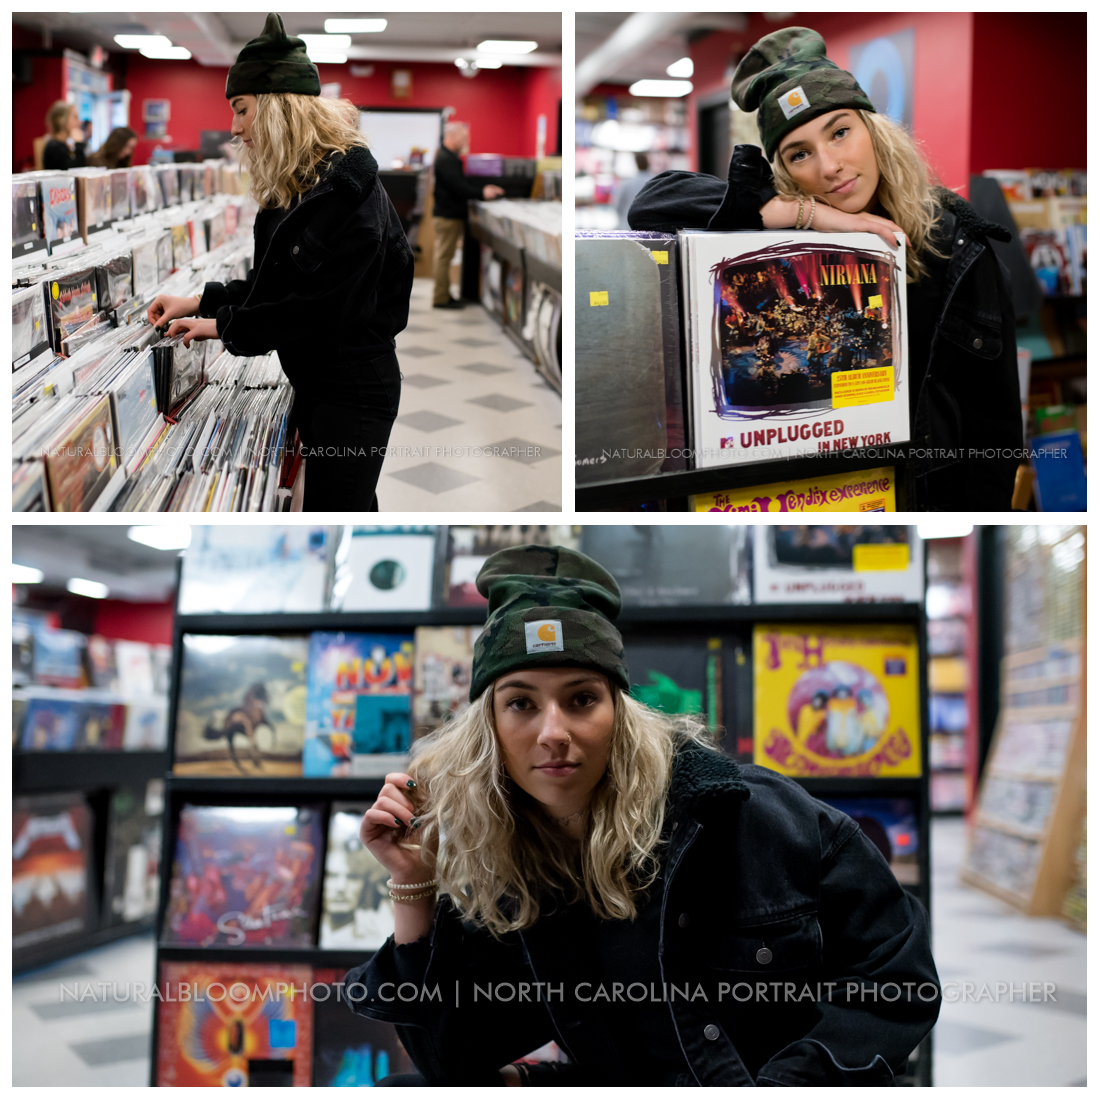 Grunge skater girl senior pictures in skate shop, record store, and graffiti wall in Uptown Charlotte North Carolina